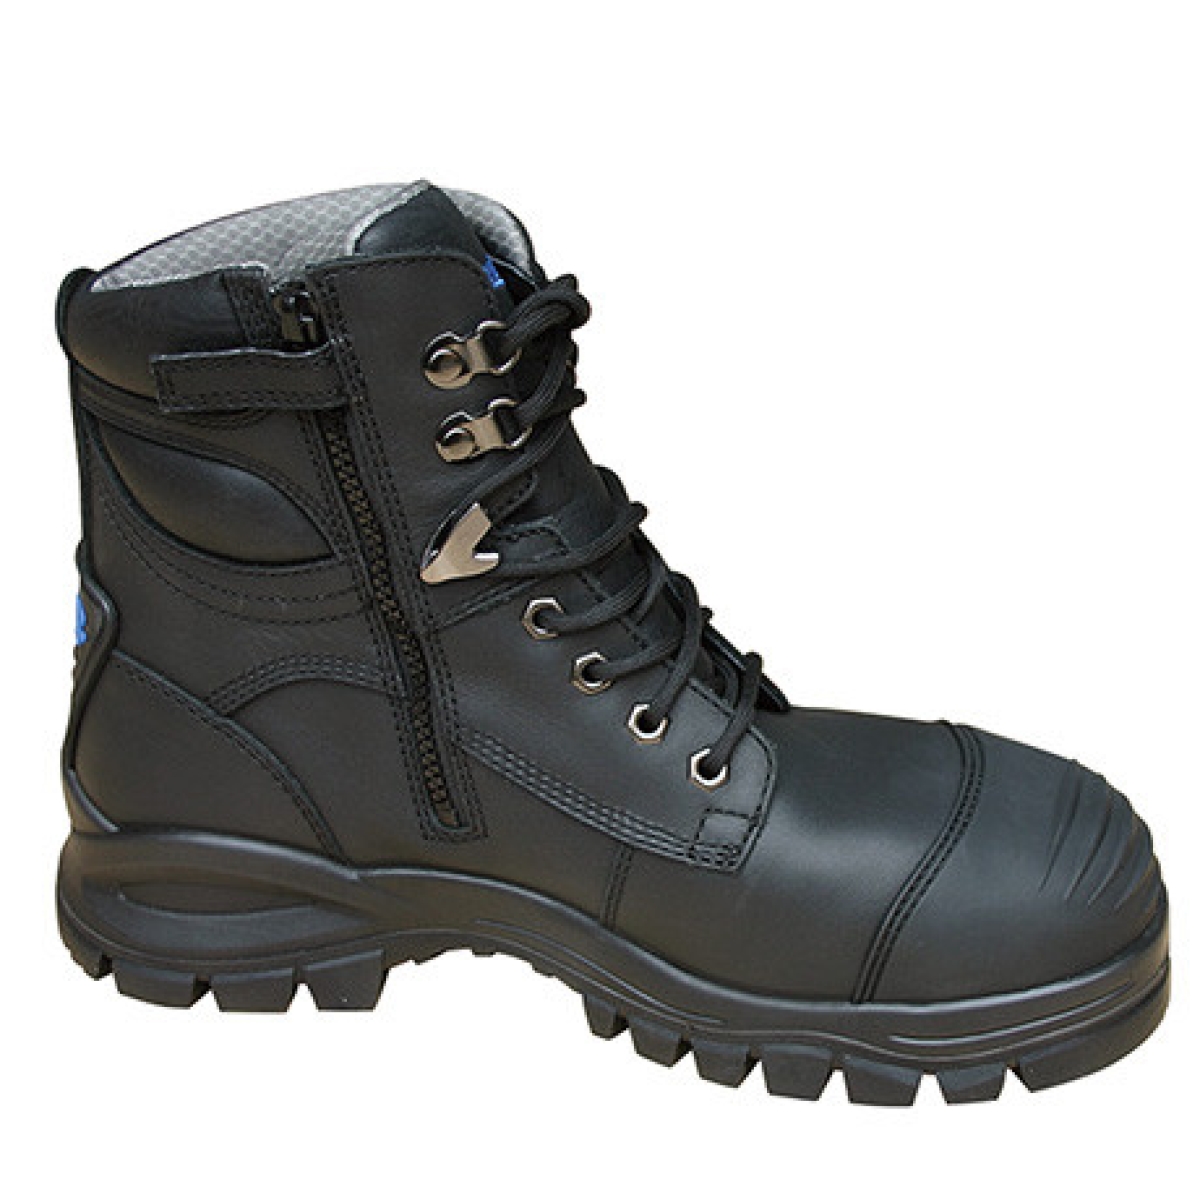 Blundstone Style 997 Safety Boot